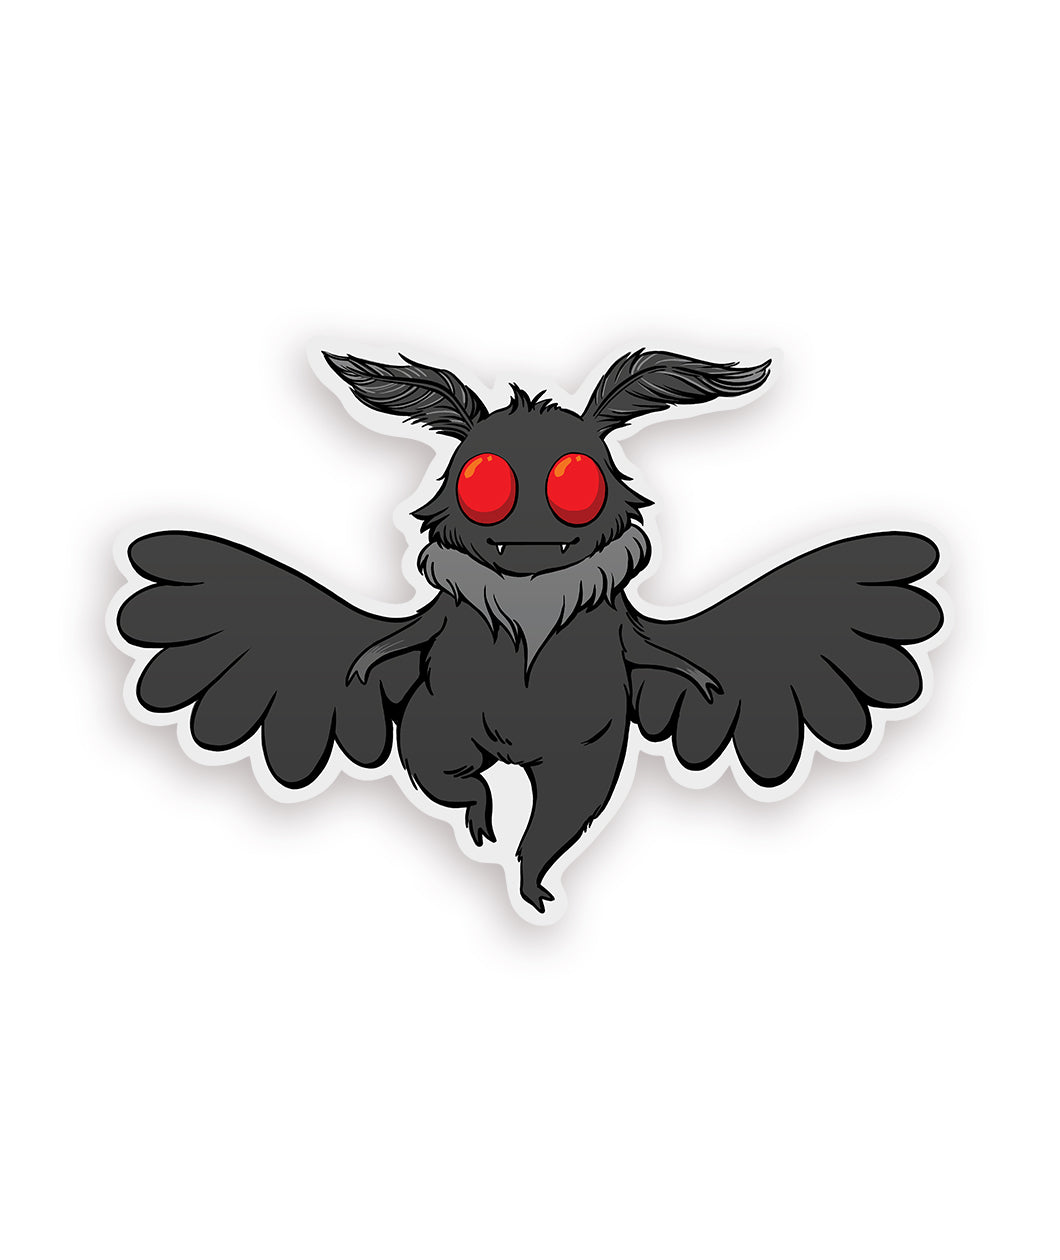 A grey sticker of mothman which appears to be a plump creature with wings outspread, small arms a beard, fangs, big glowing red eyes and feathery ears. From Spirits.  